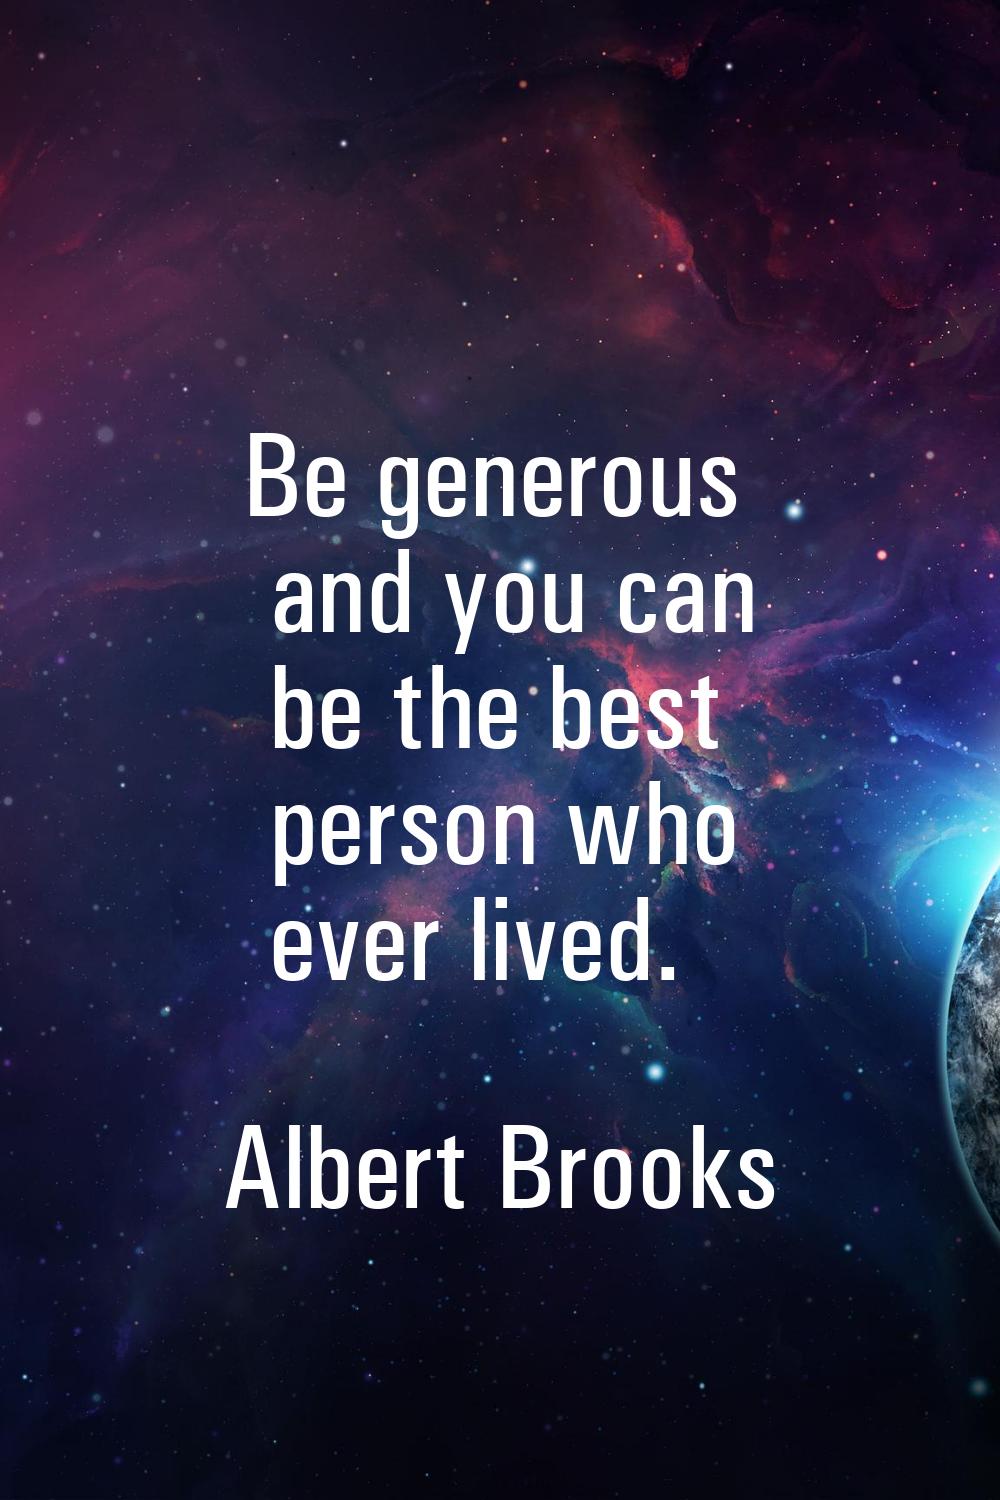 Be generous and you can be the best person who ever lived.